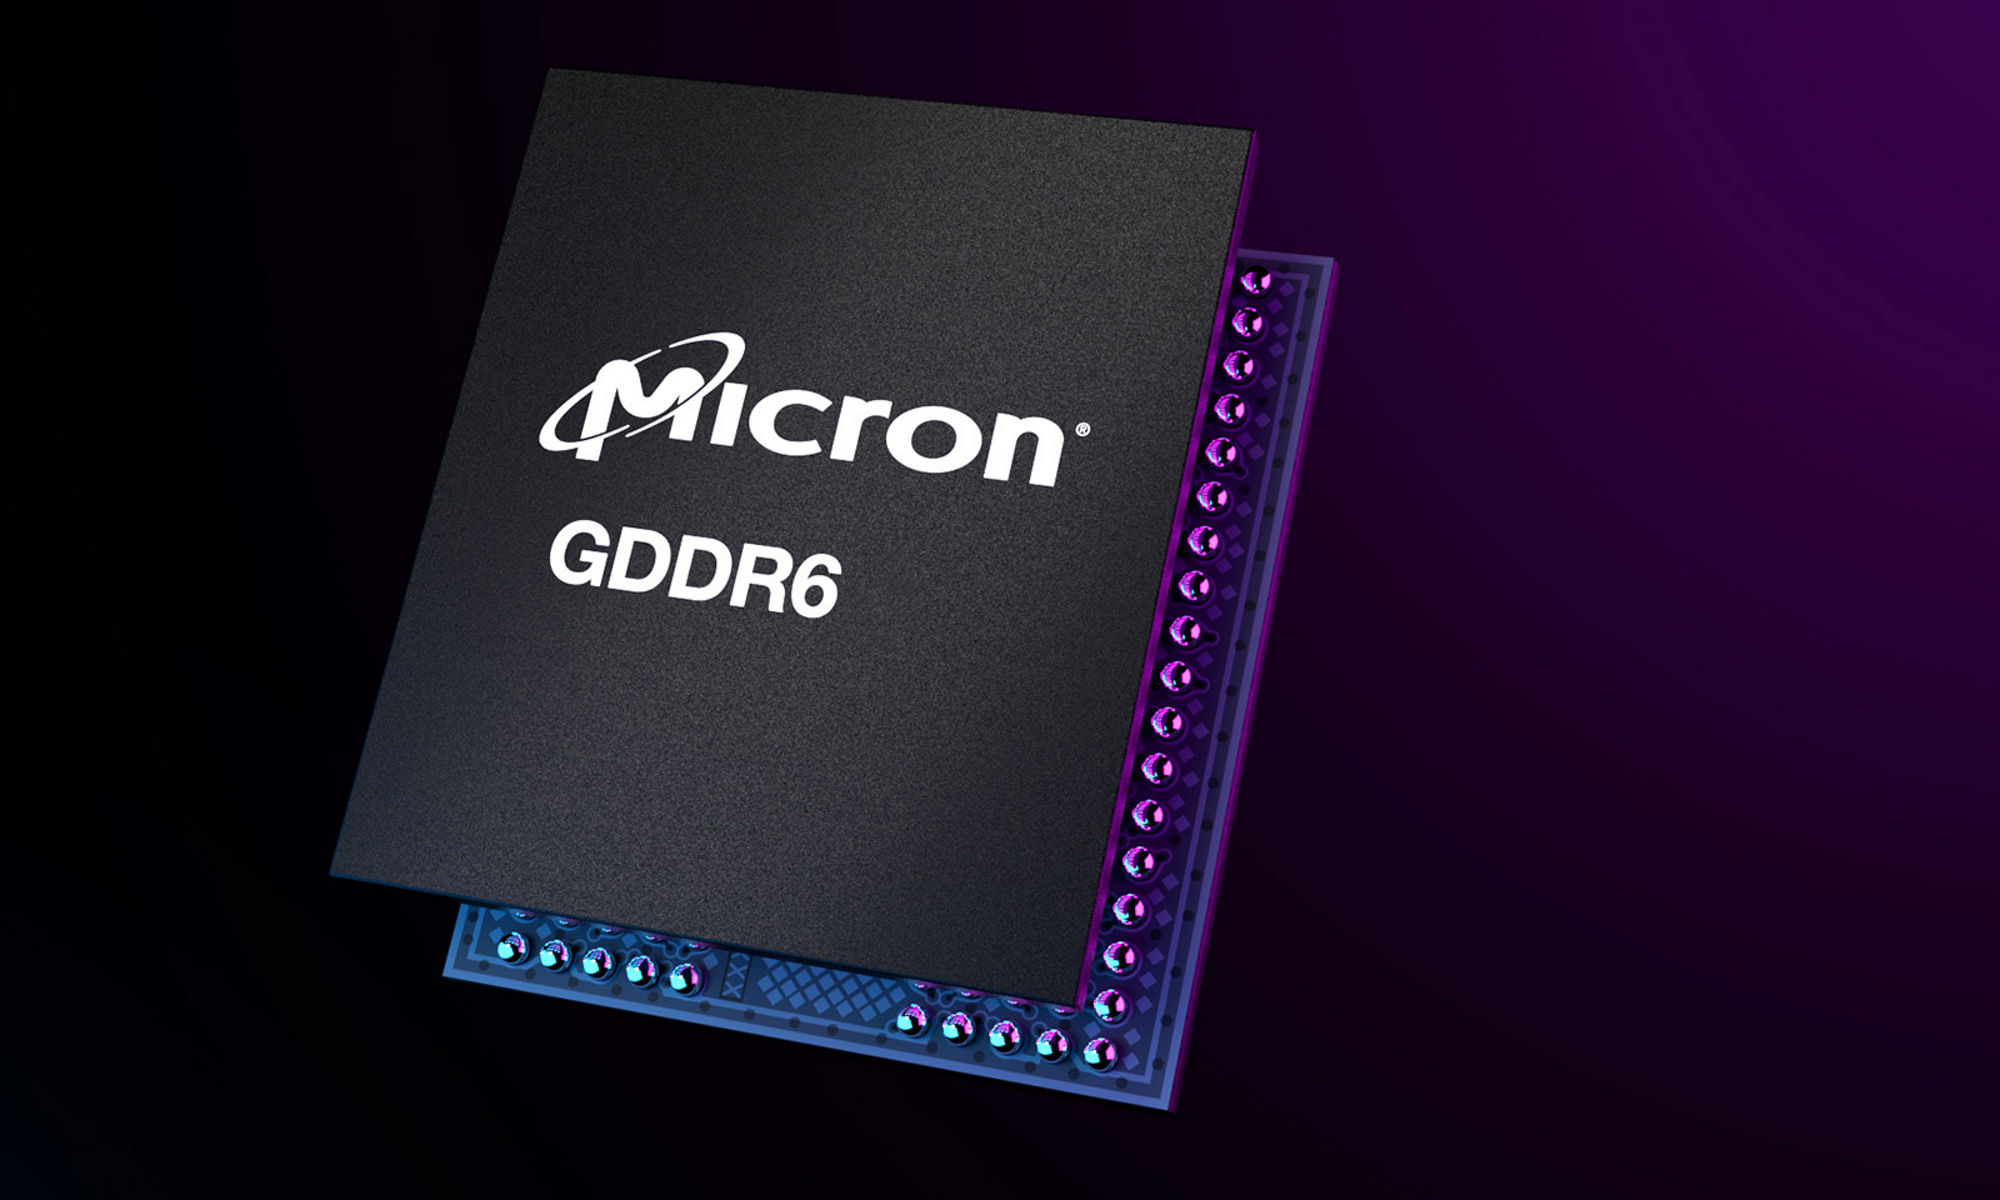 Product shot of Micron GDDR6 product